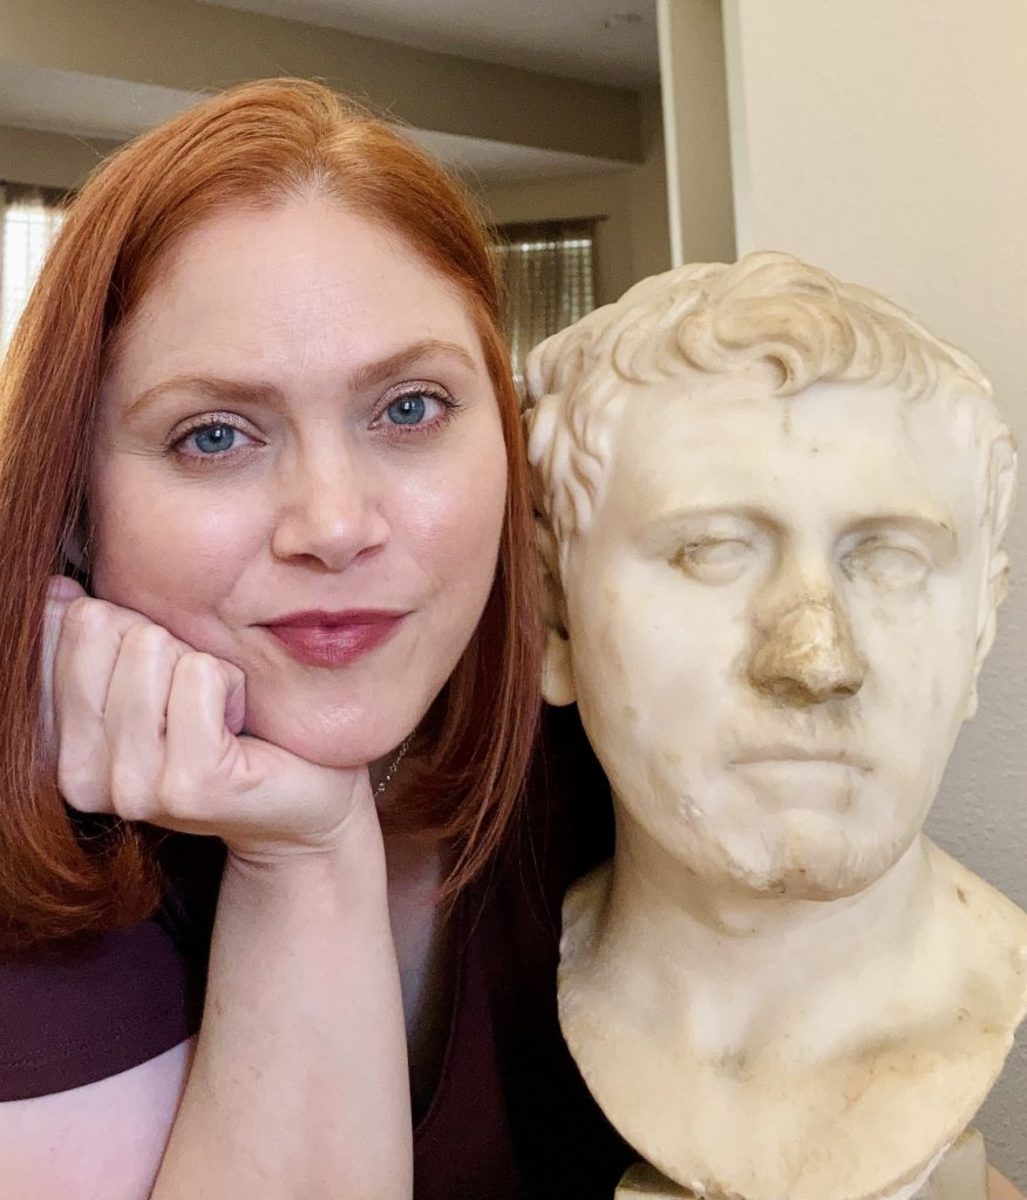 Laura Young with the bust she found at Goodwill that is thought to likely depict Sextus Pompey, who dedicated his life to avenging his father’s death.